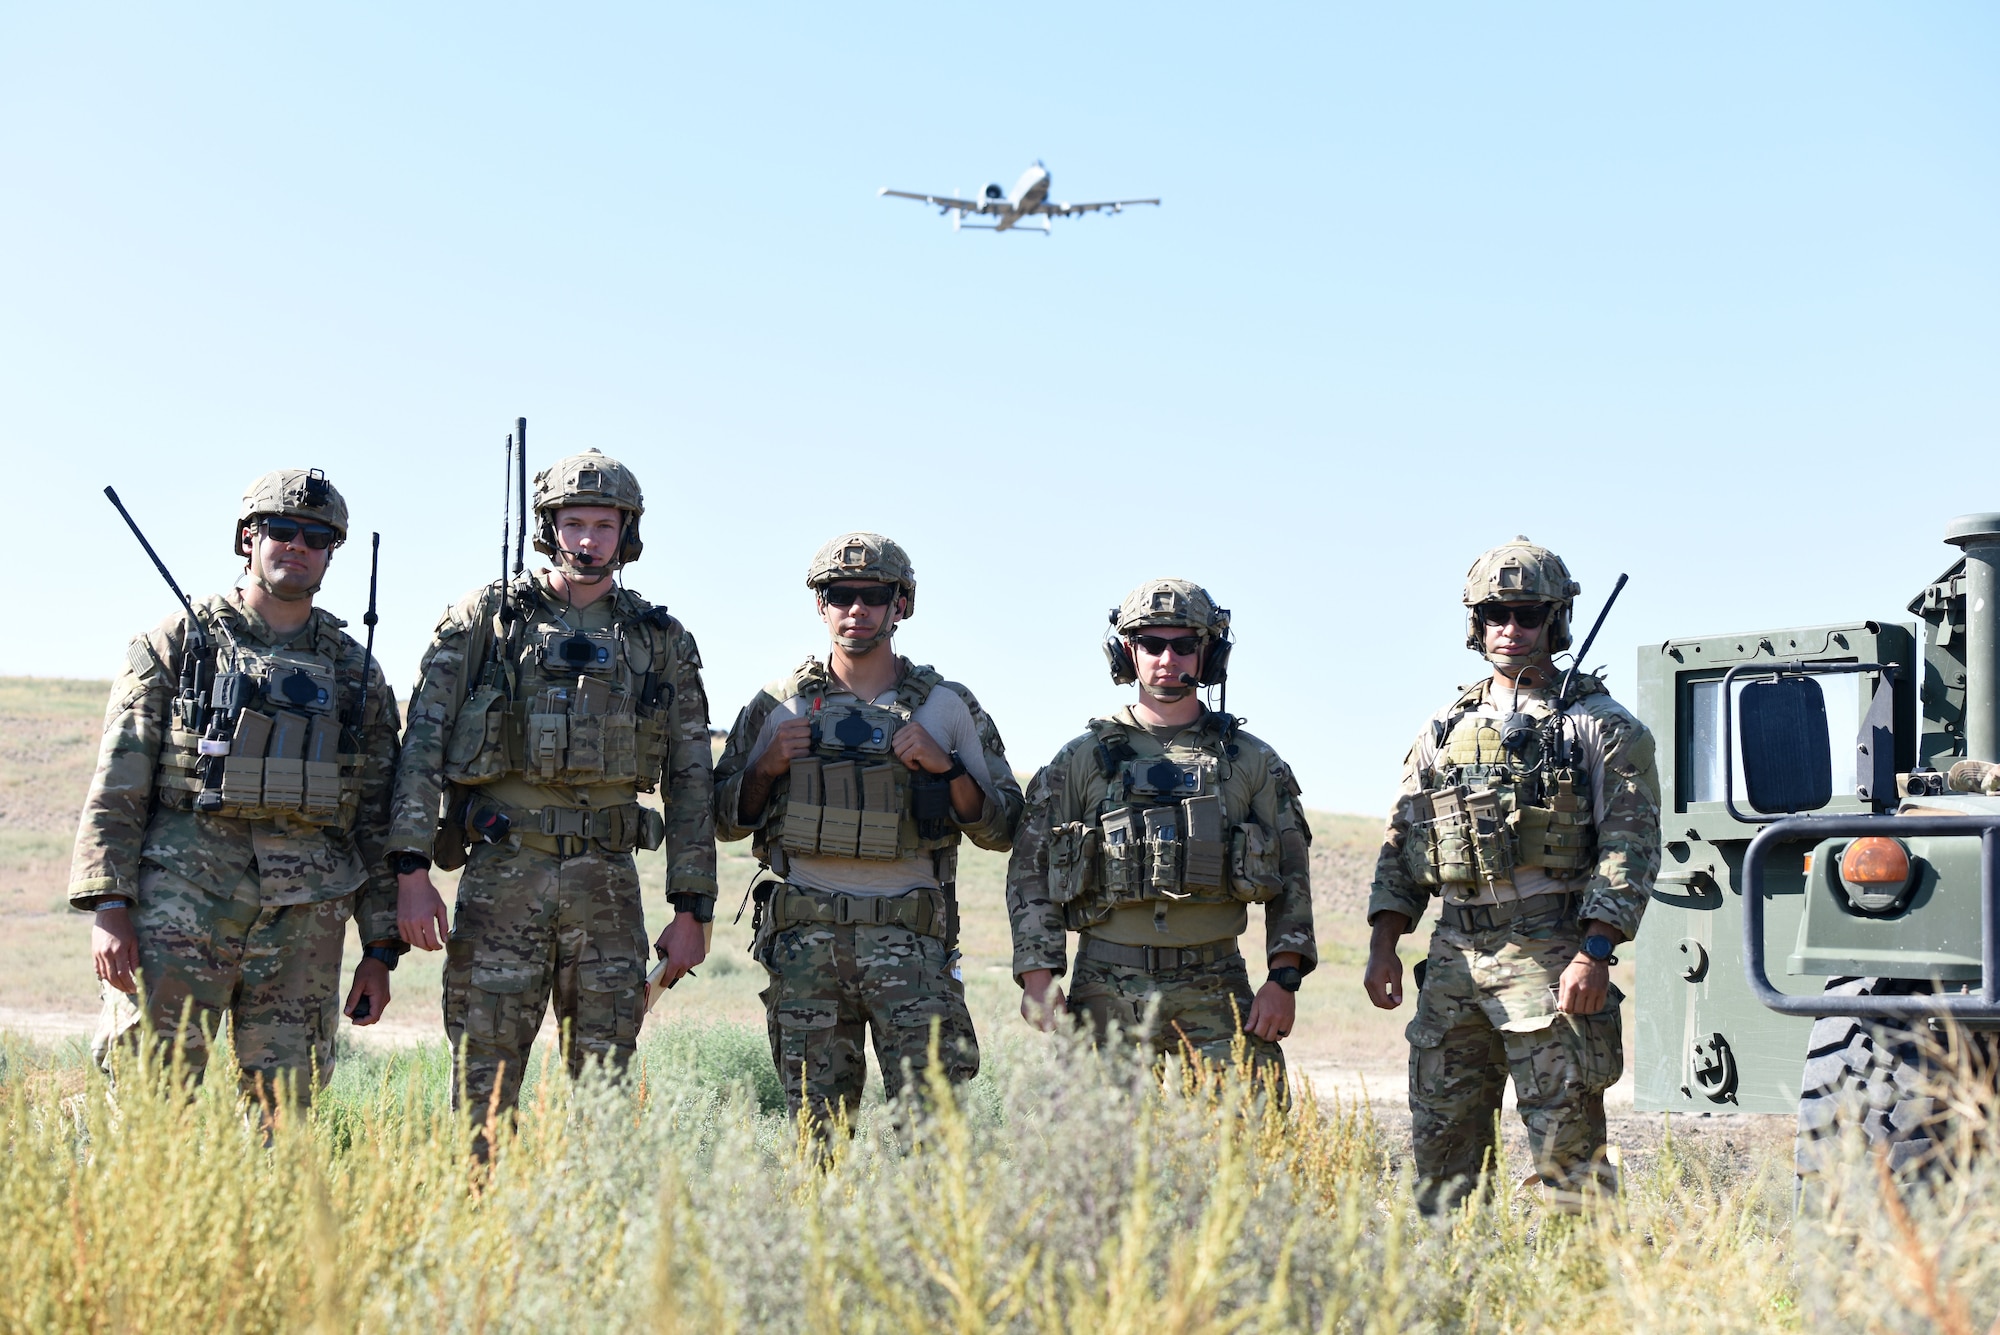 U.S. Air Force Tactical Air Control Party Specialists with the 148th Air Support Operations Squadron anticipate the final pass of an A-10 after they called in the aircraft to do a simulated air strike Aug. 13, 2019.